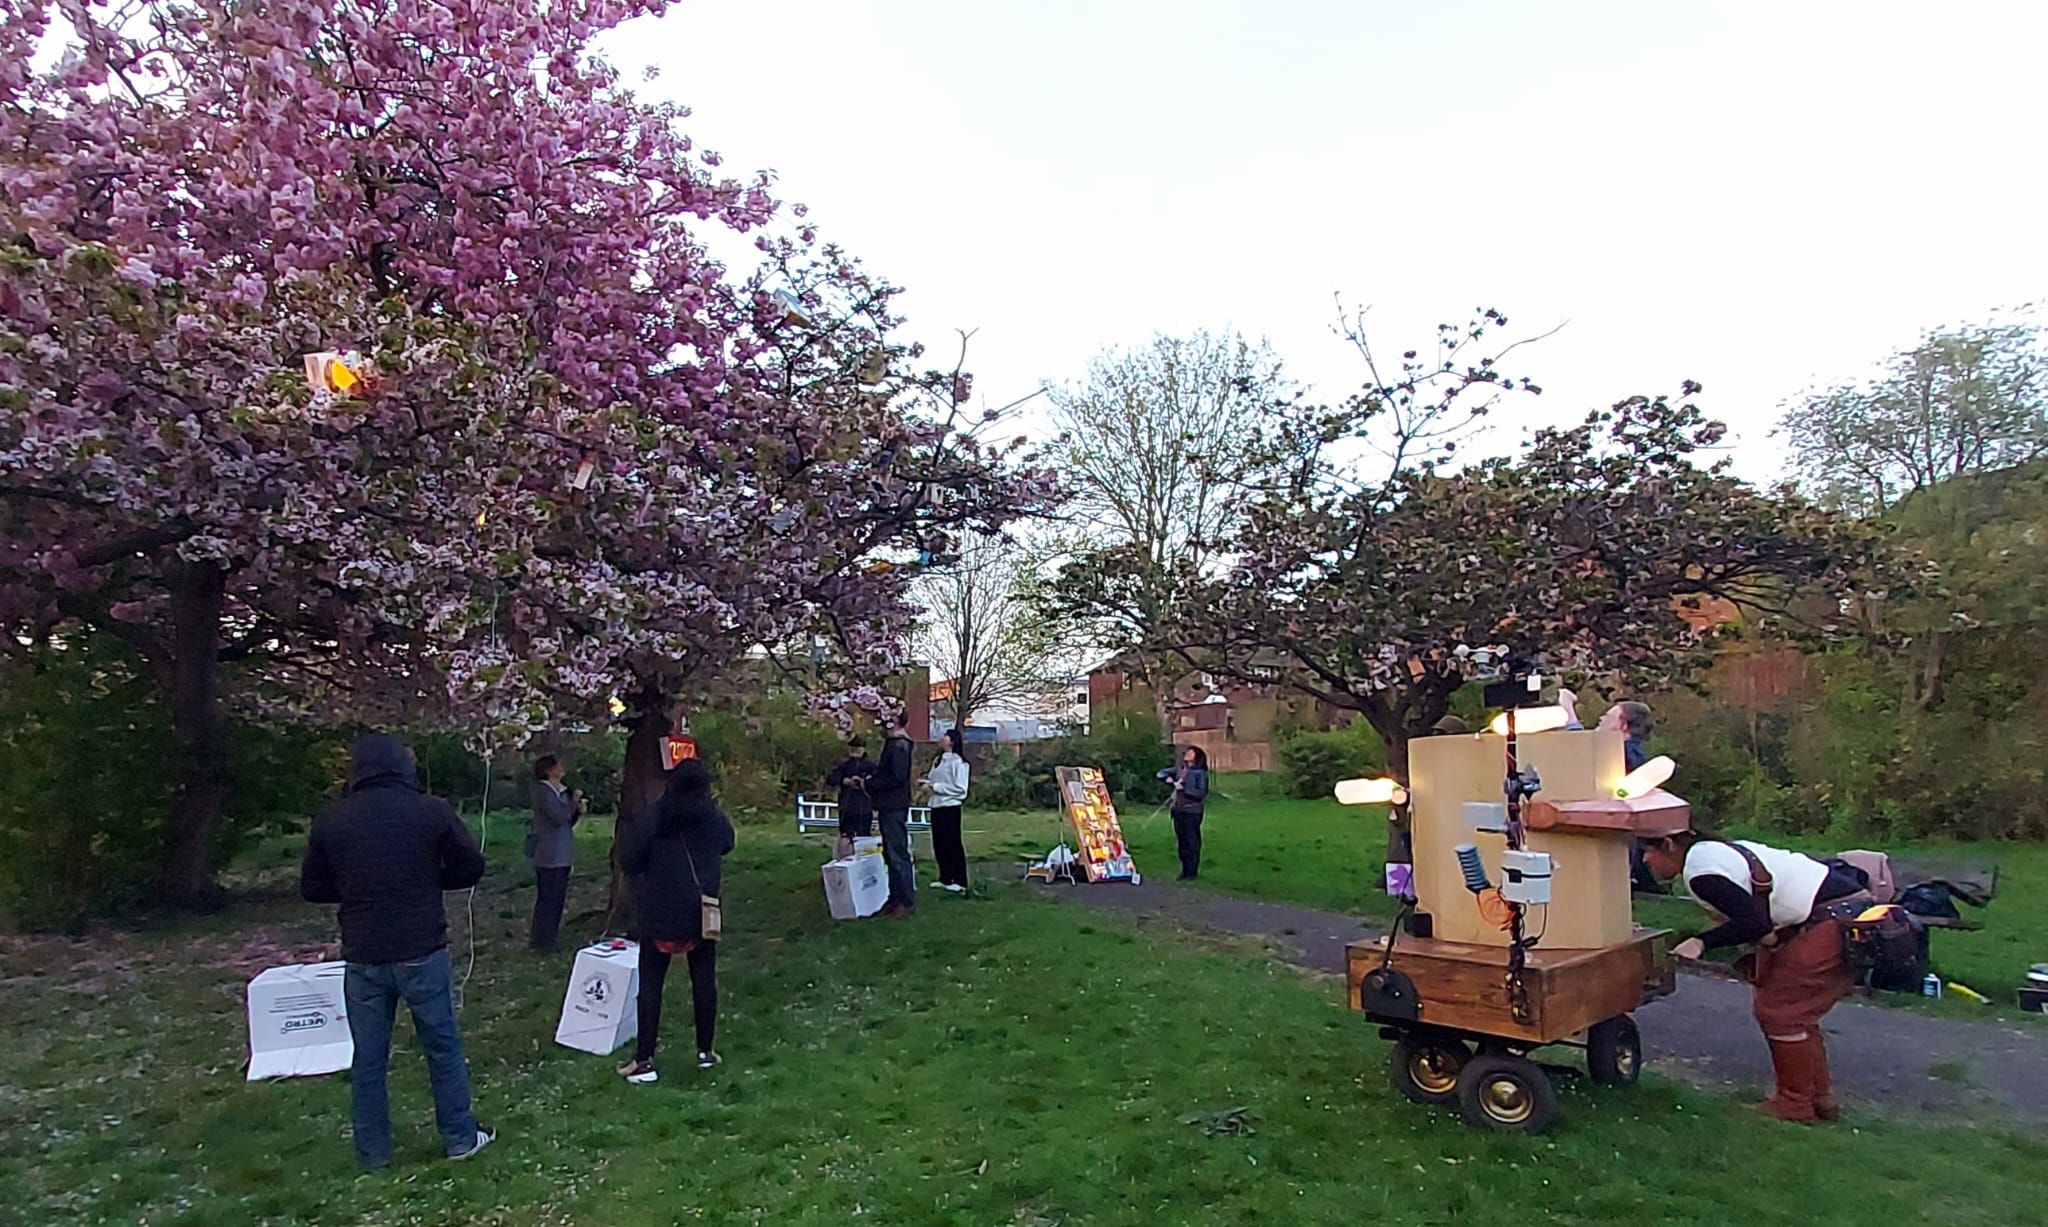 people standing around the blossom trees with lit up bird boxes in amongst the blossoms. Rachel turning the handle of the Future Machine that is also lit up with plastic white milk bottle lights